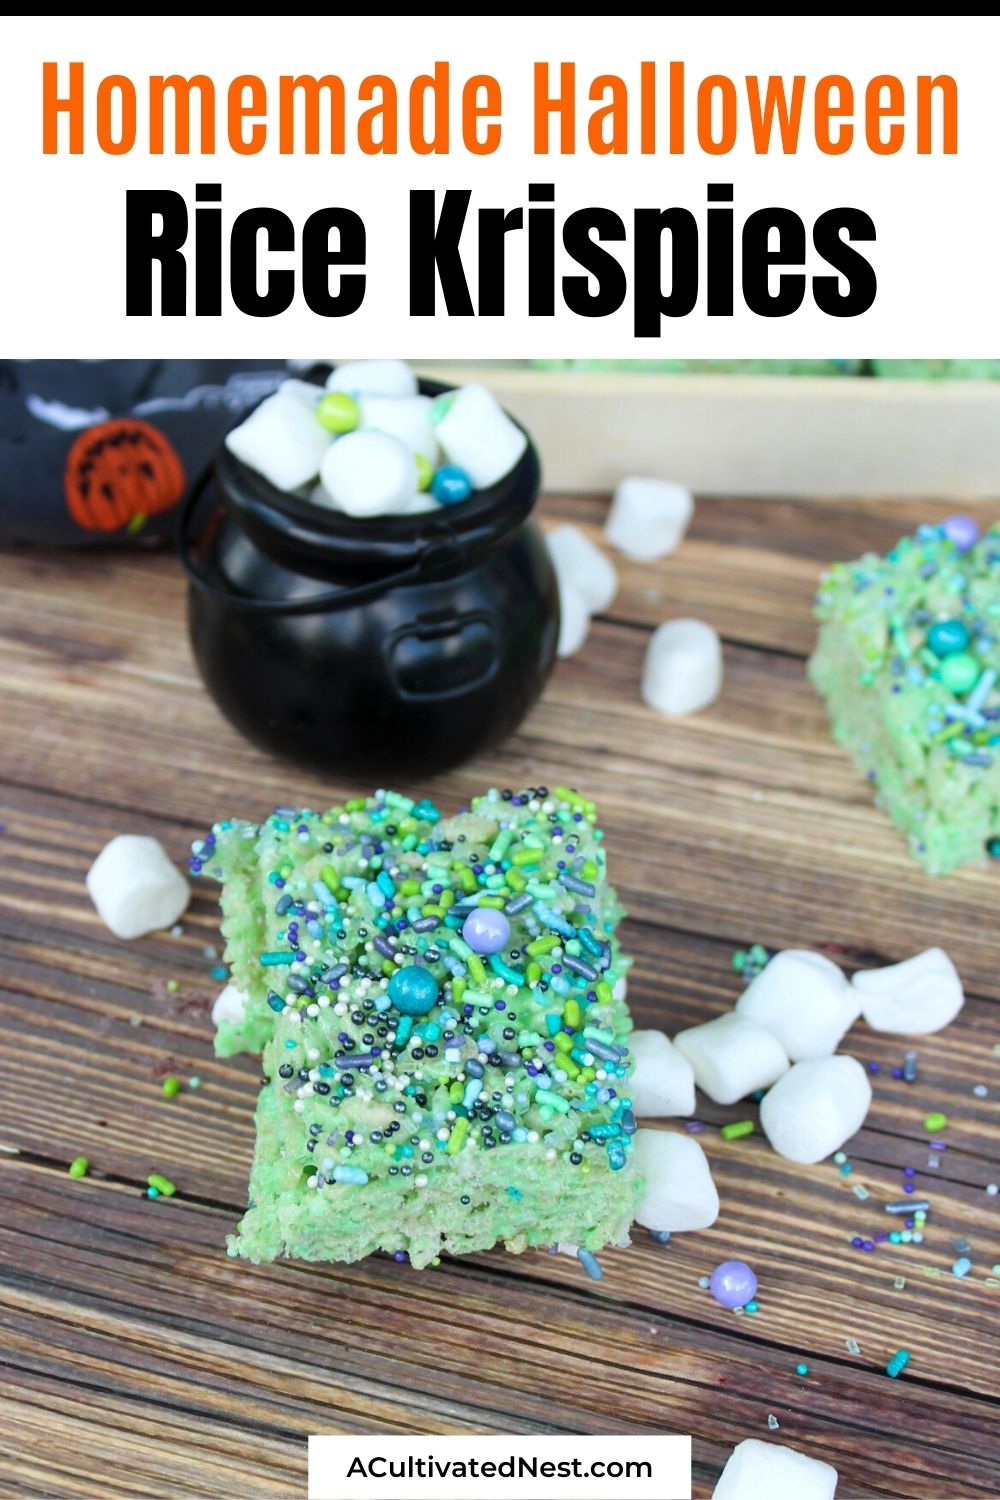 Witches Brew Halloween Rice Krispies- For a fun, easy, and delicious Halloween treat, make these witches brew homemade Halloween rice krispies! This no-bake Halloween recipe is perfect for feeding a crowd, or for a simple family evening! | #HalloweenRecipes #recipes #dessertRecipes #riceKrispieRecipes #ACultivatedNest